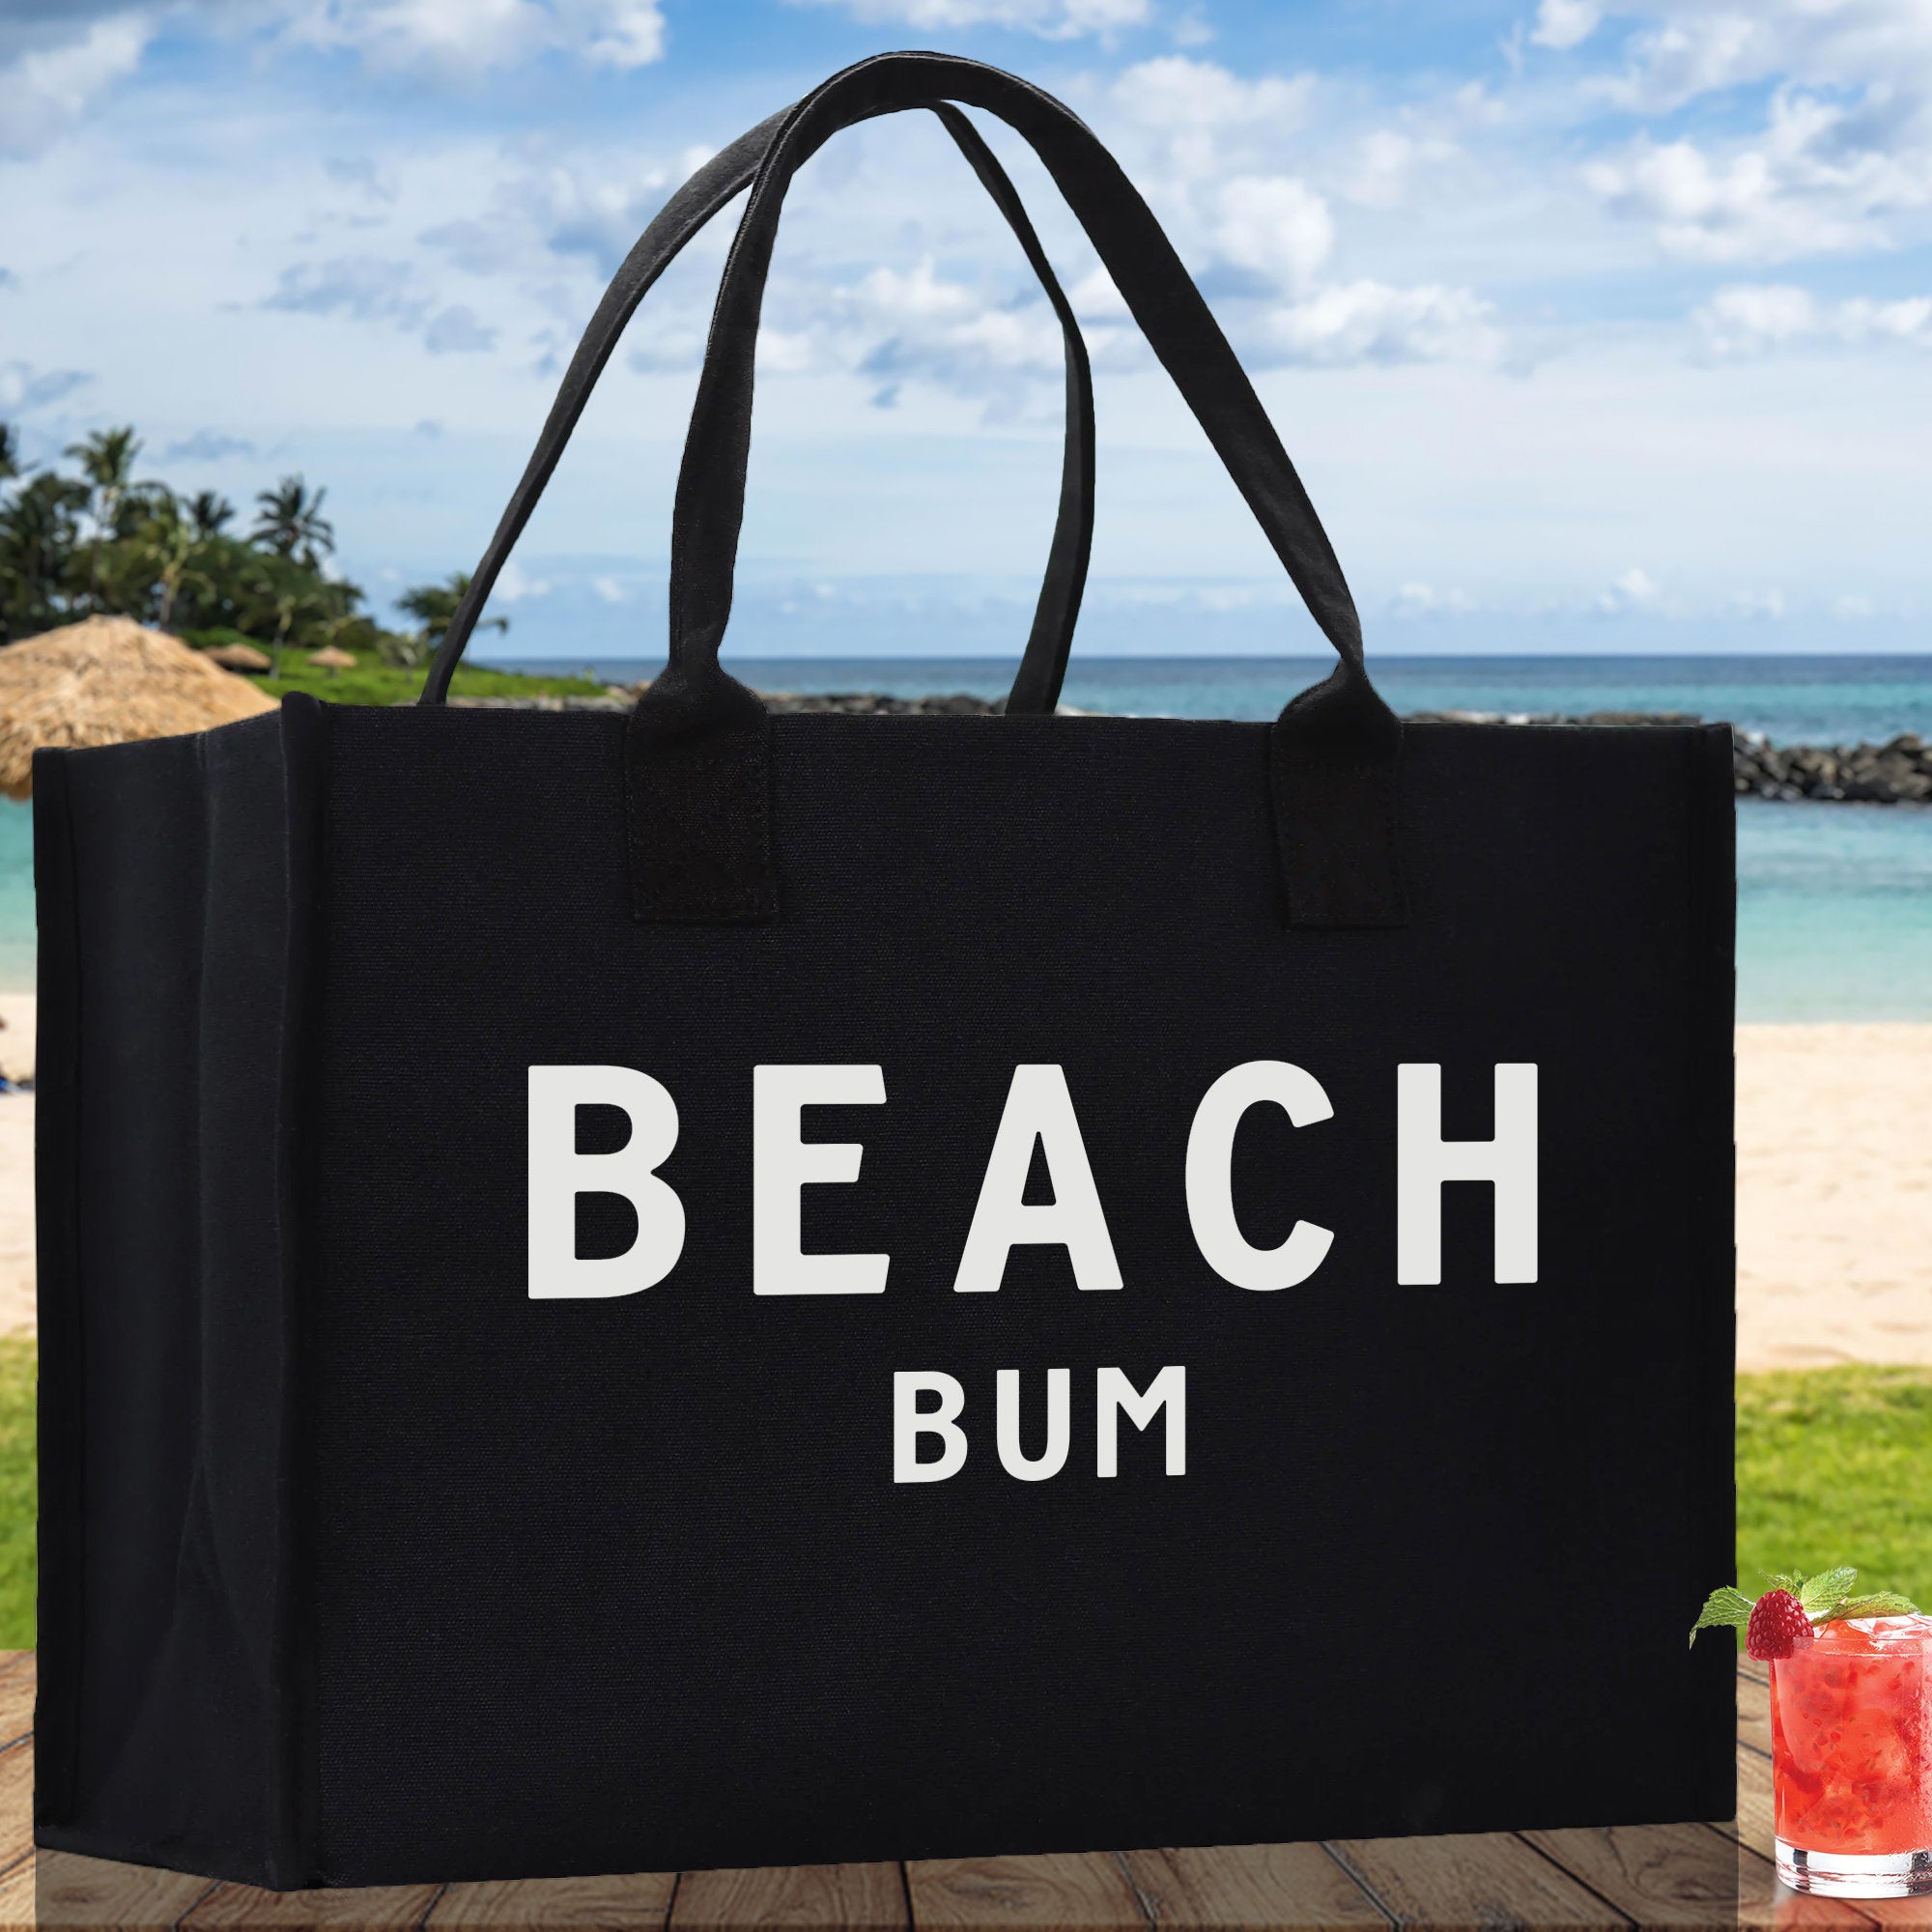 Beach Bum Cotton Canvas Chic Beach Tote Bag Multipurpose Tote Weekender Tote Gift for Her Outdoor Tote Vacation Tote Large Beach Bag